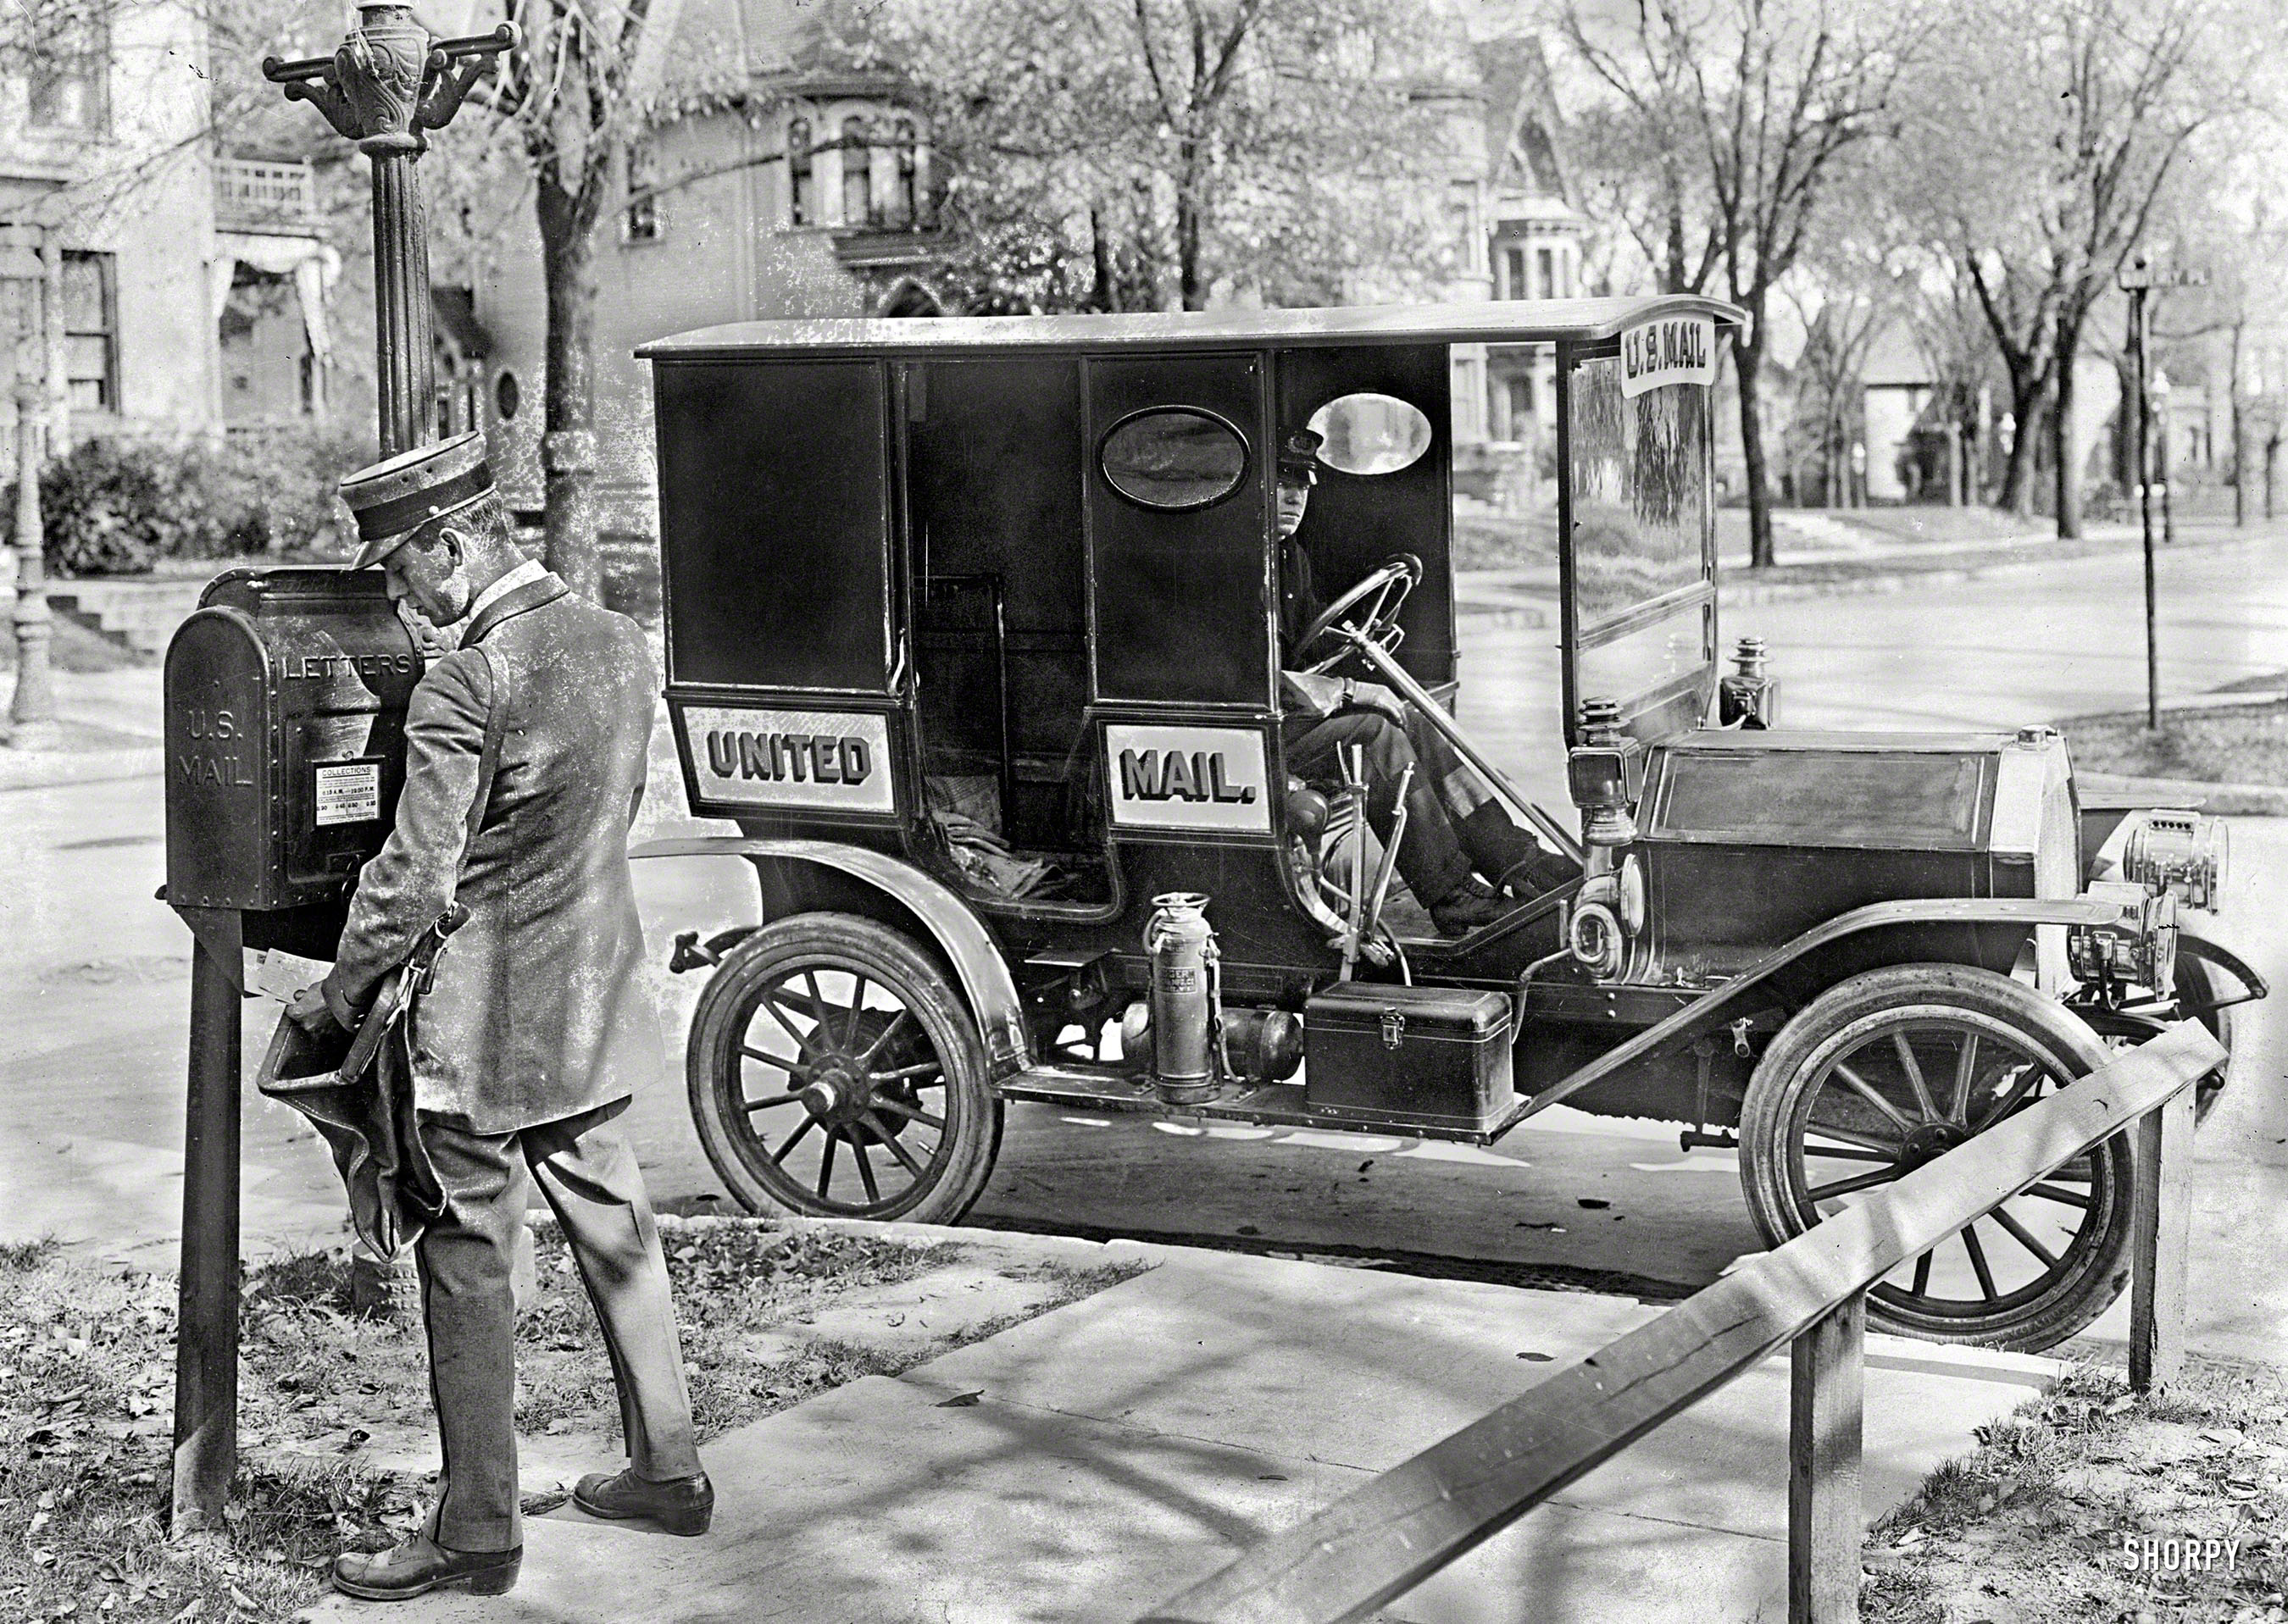 Circa 1915. "Mailman and truck," location unknown. Collection times 6:15 a.m. to noon. National Photo Company Collection glass negative. View full size.